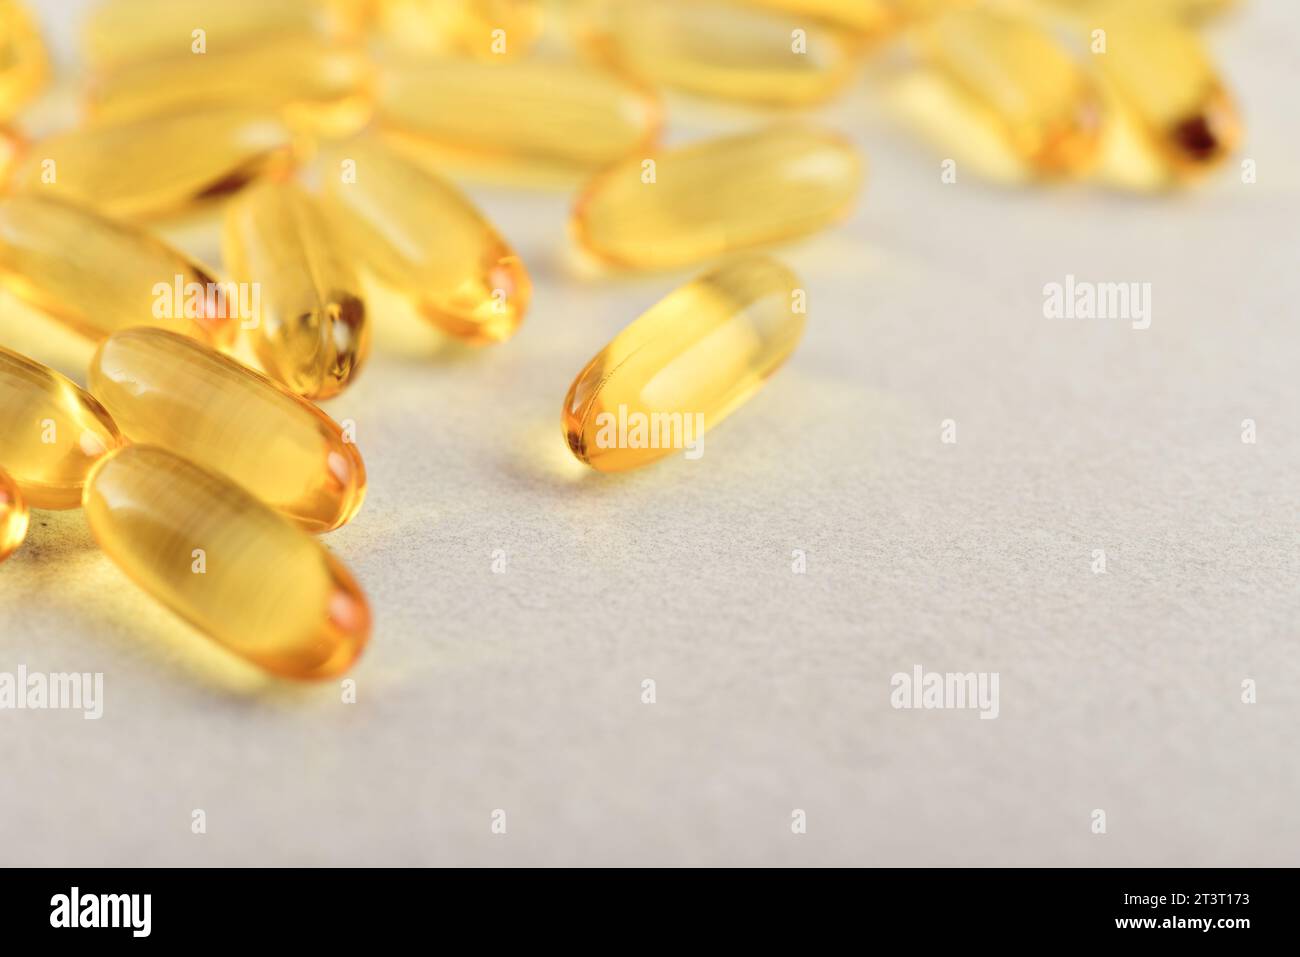 Cod liver oil capsules on light background closeup Stock Photo